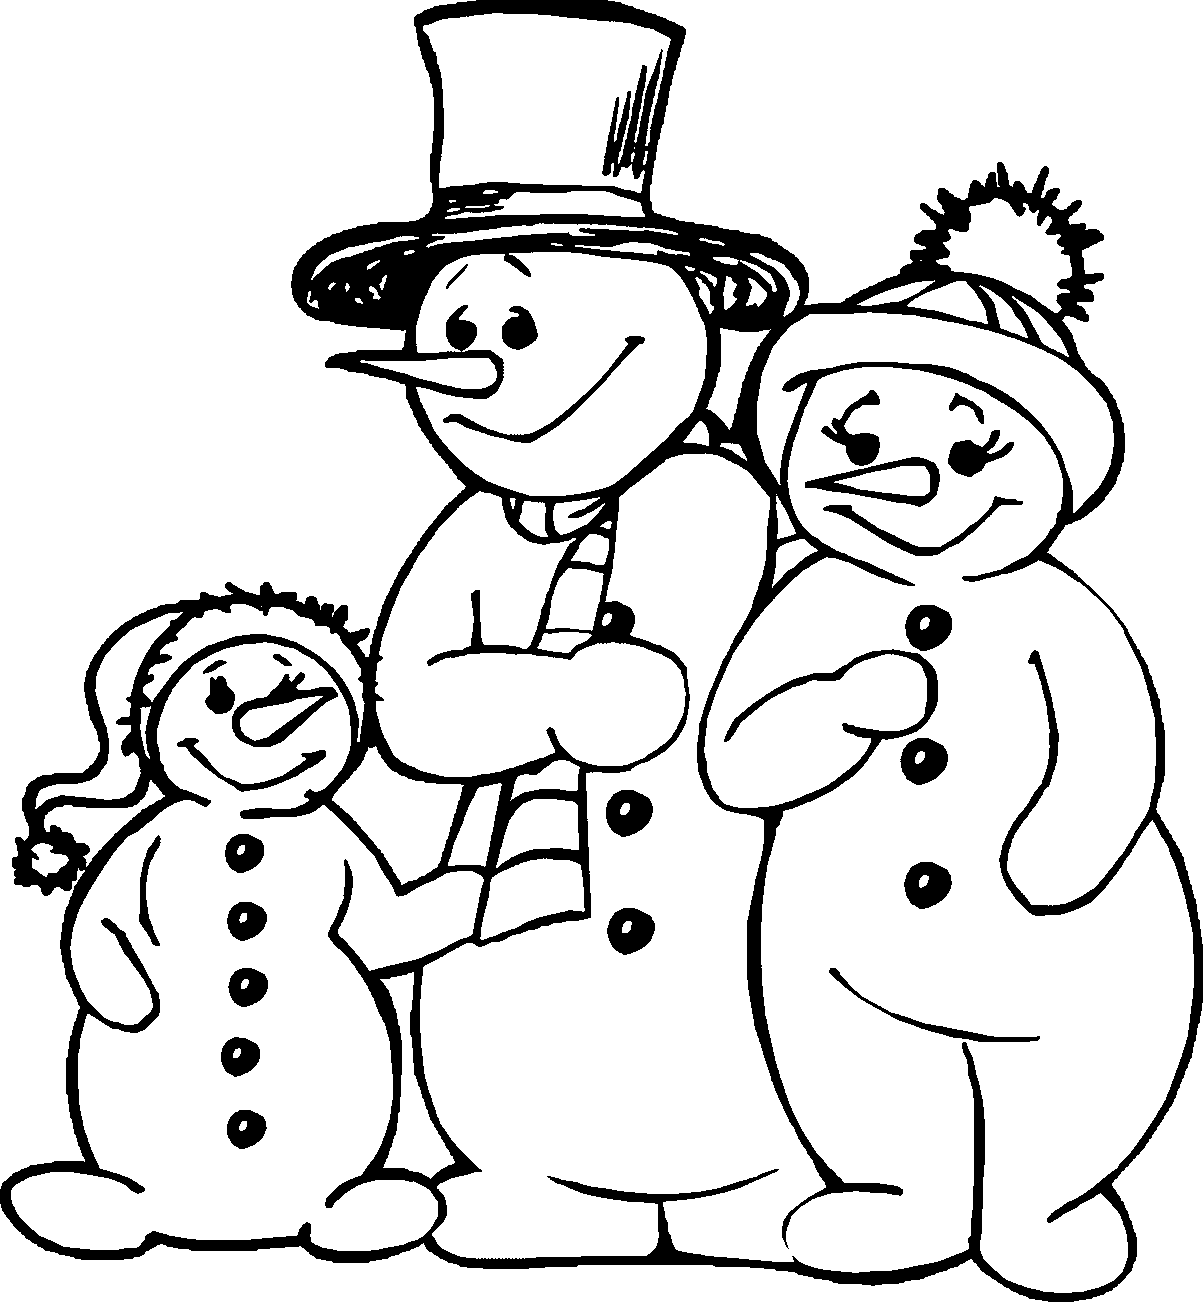 39. New Year For The Snowman Family Coloring Page